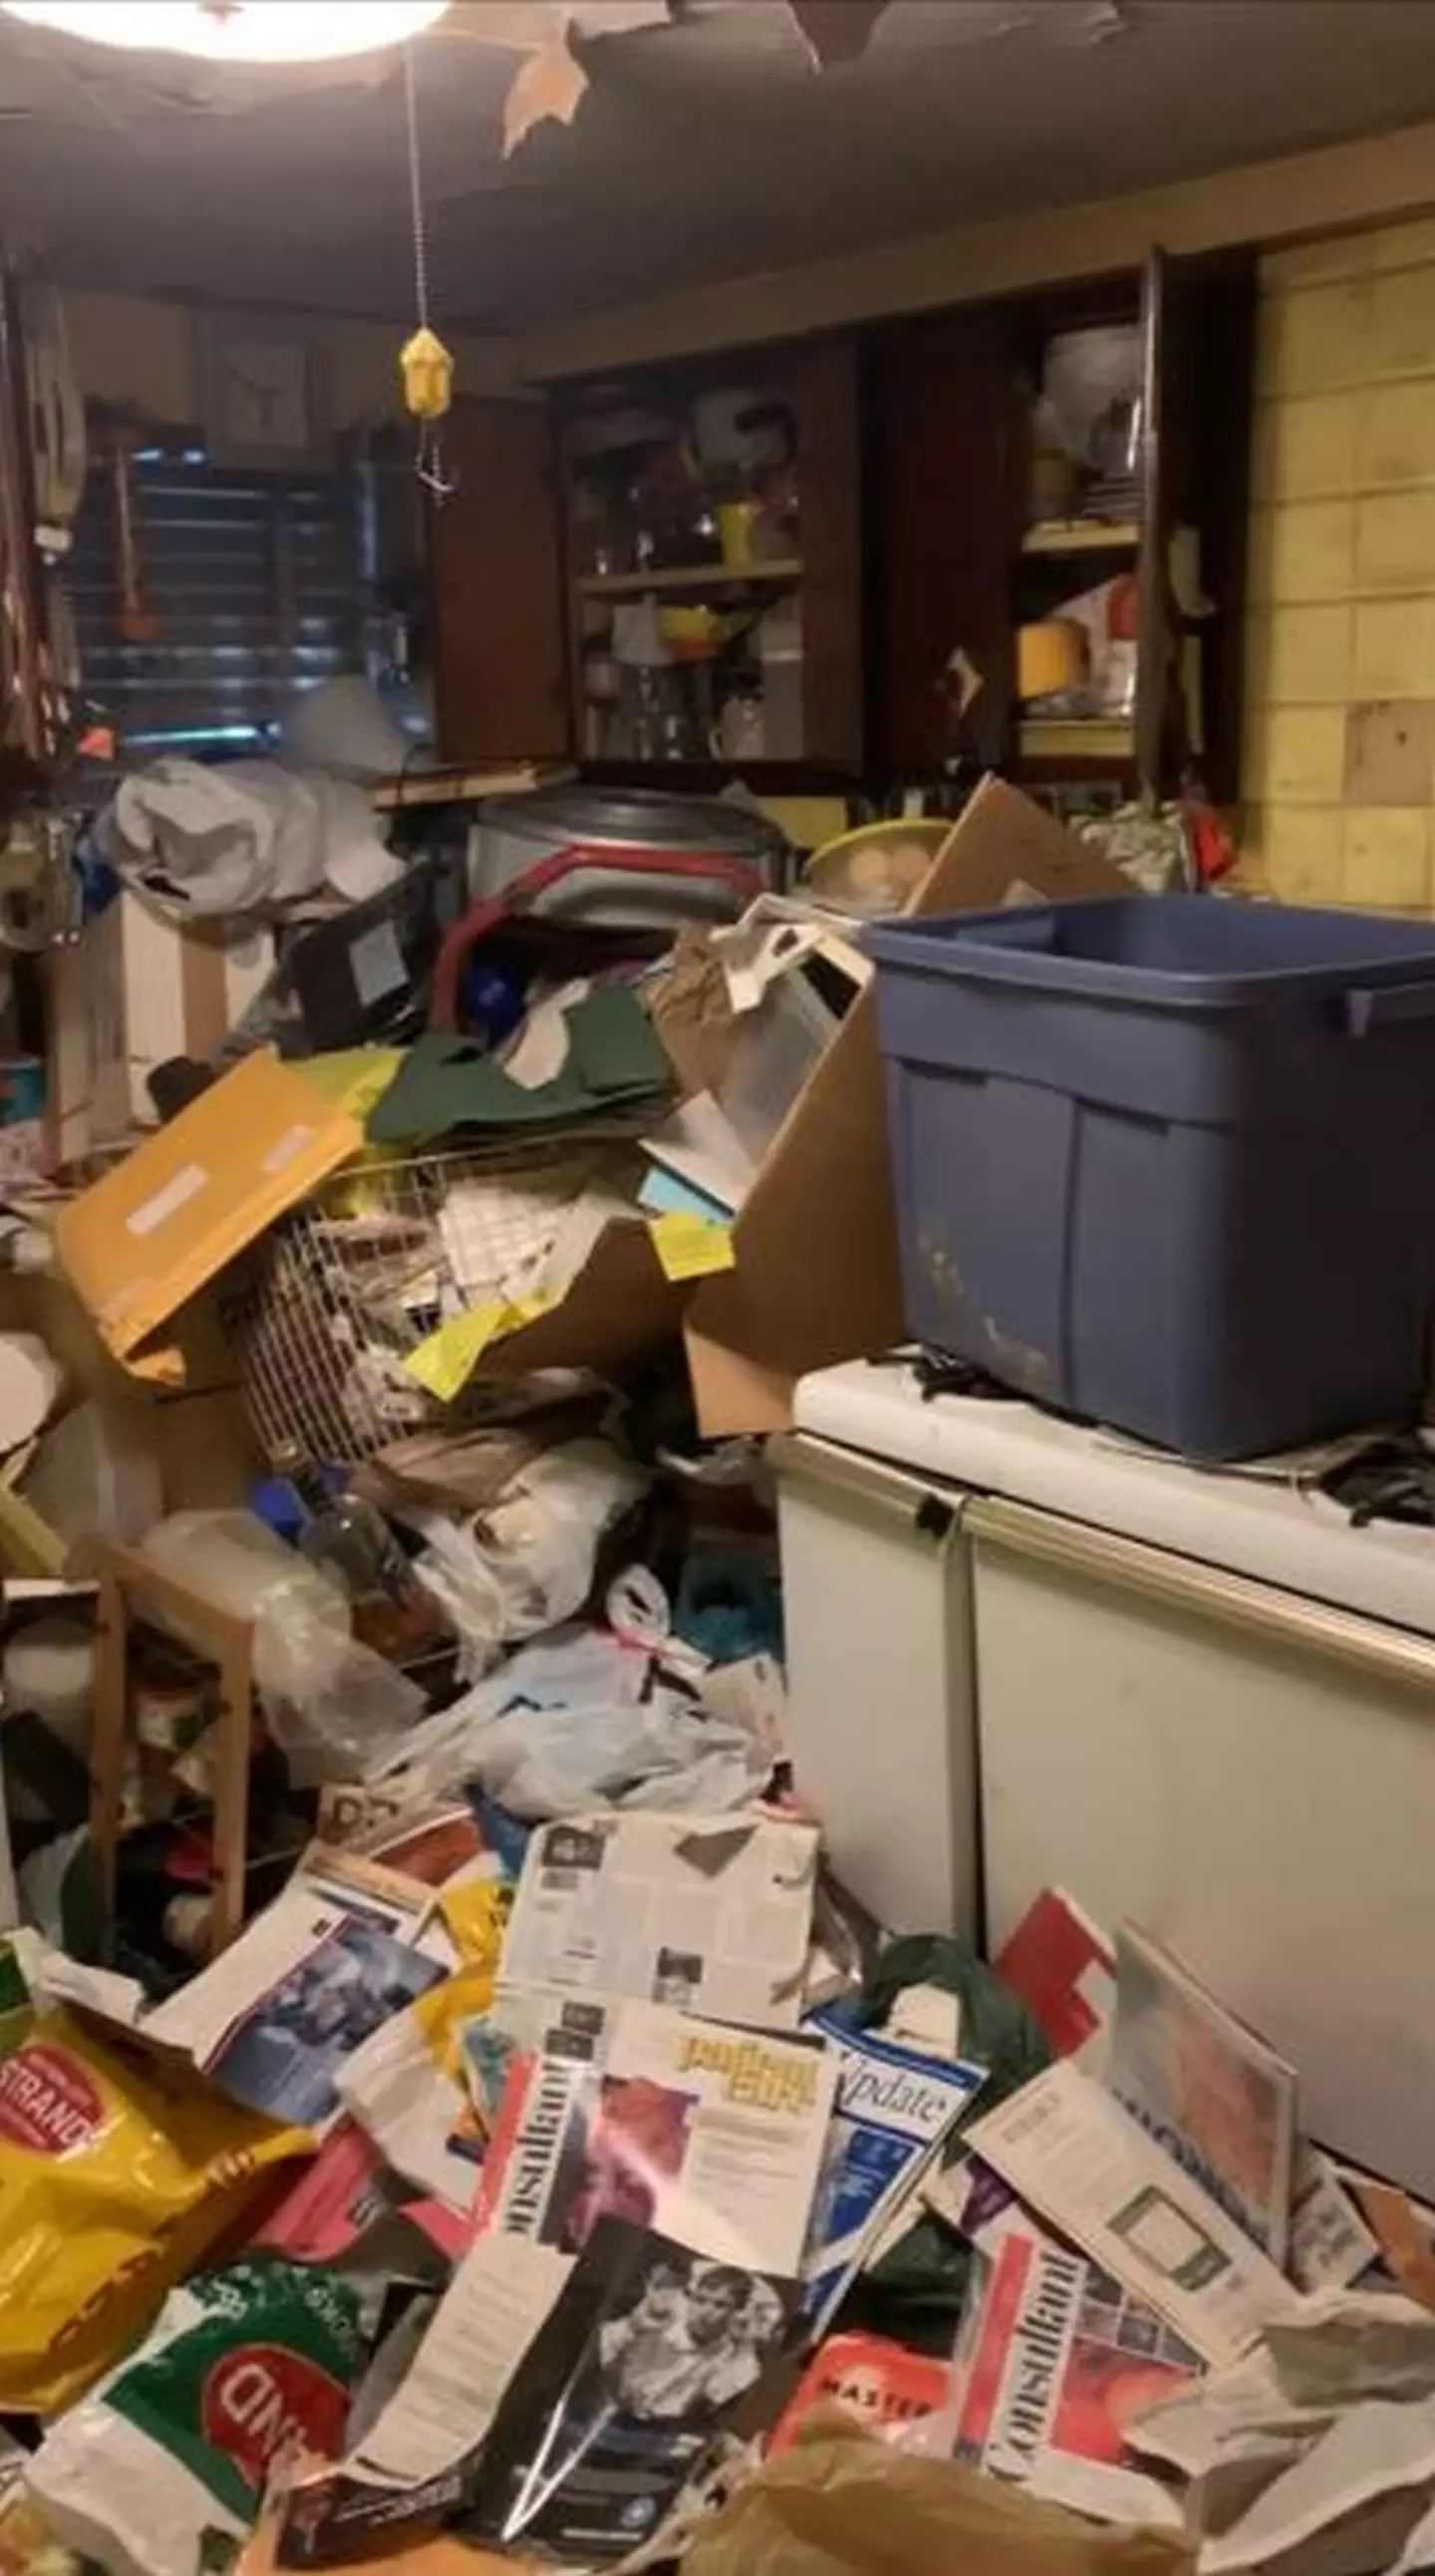 When the couple had a viewing at the home they saw it was full of a hoarder's stash.